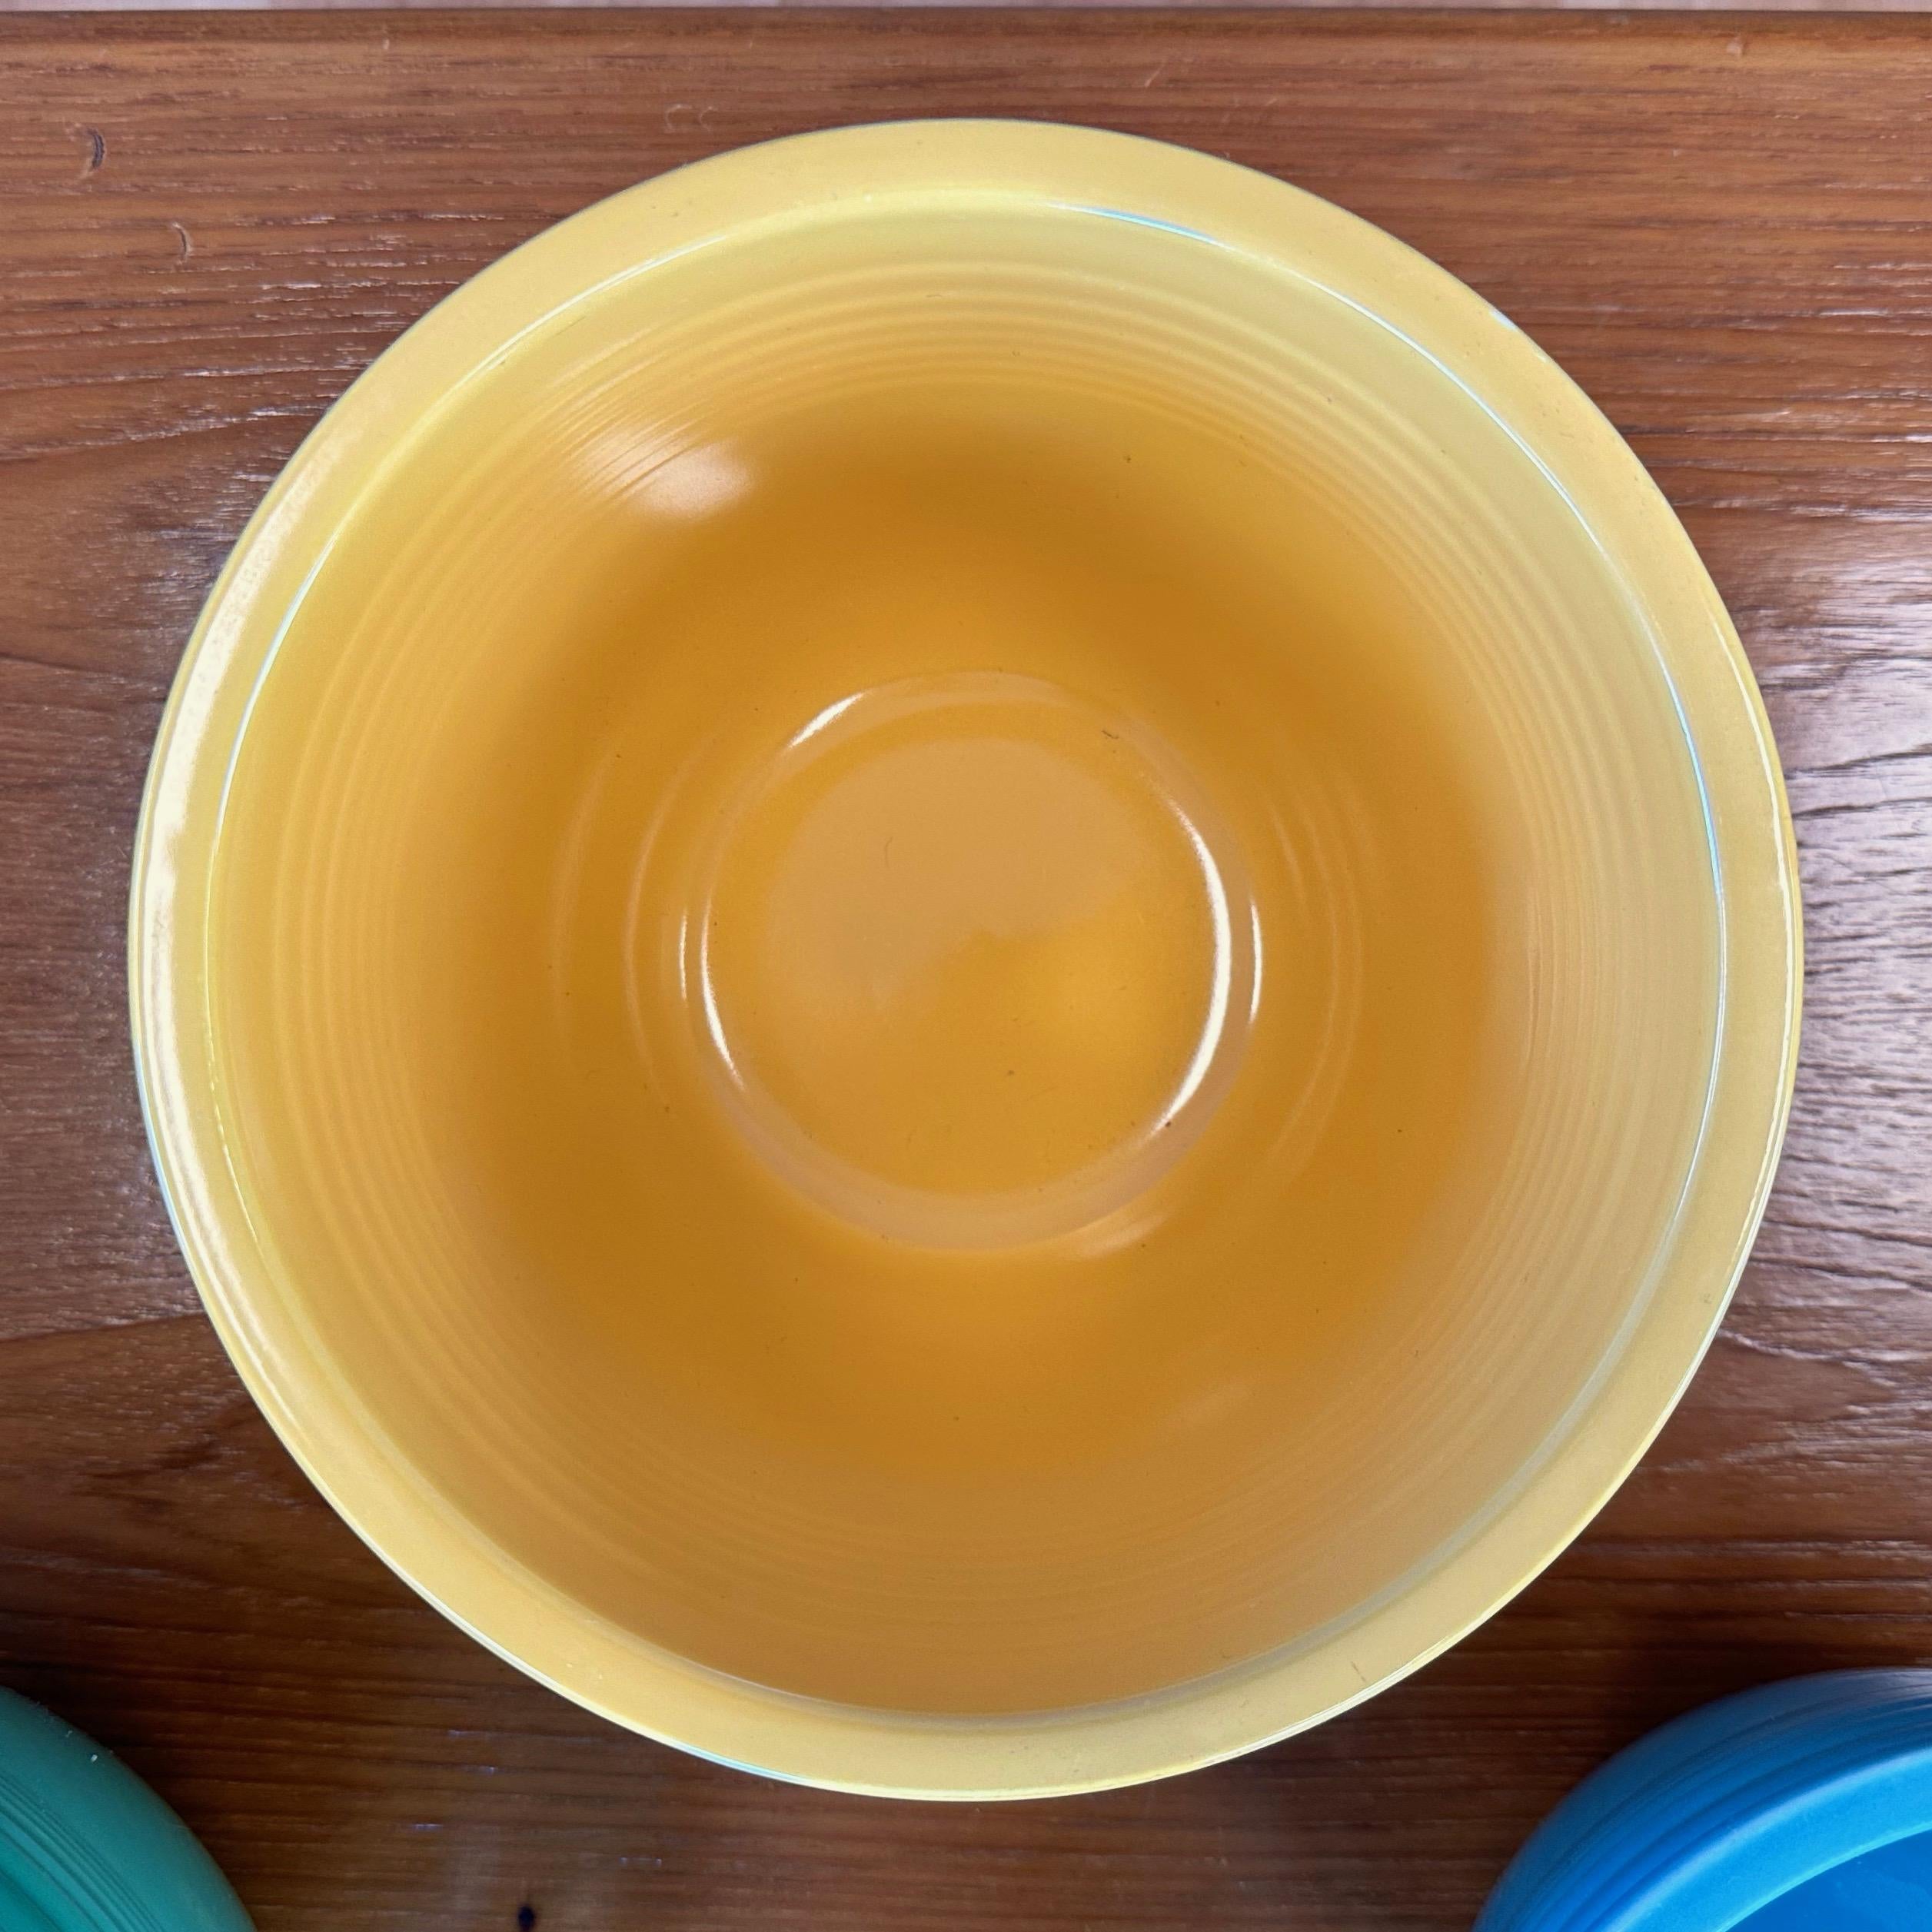 Early Vintage Fiestaware Nesting Mixing Bowls, Multi-Color Set of Six, c. 1940 For Sale 4